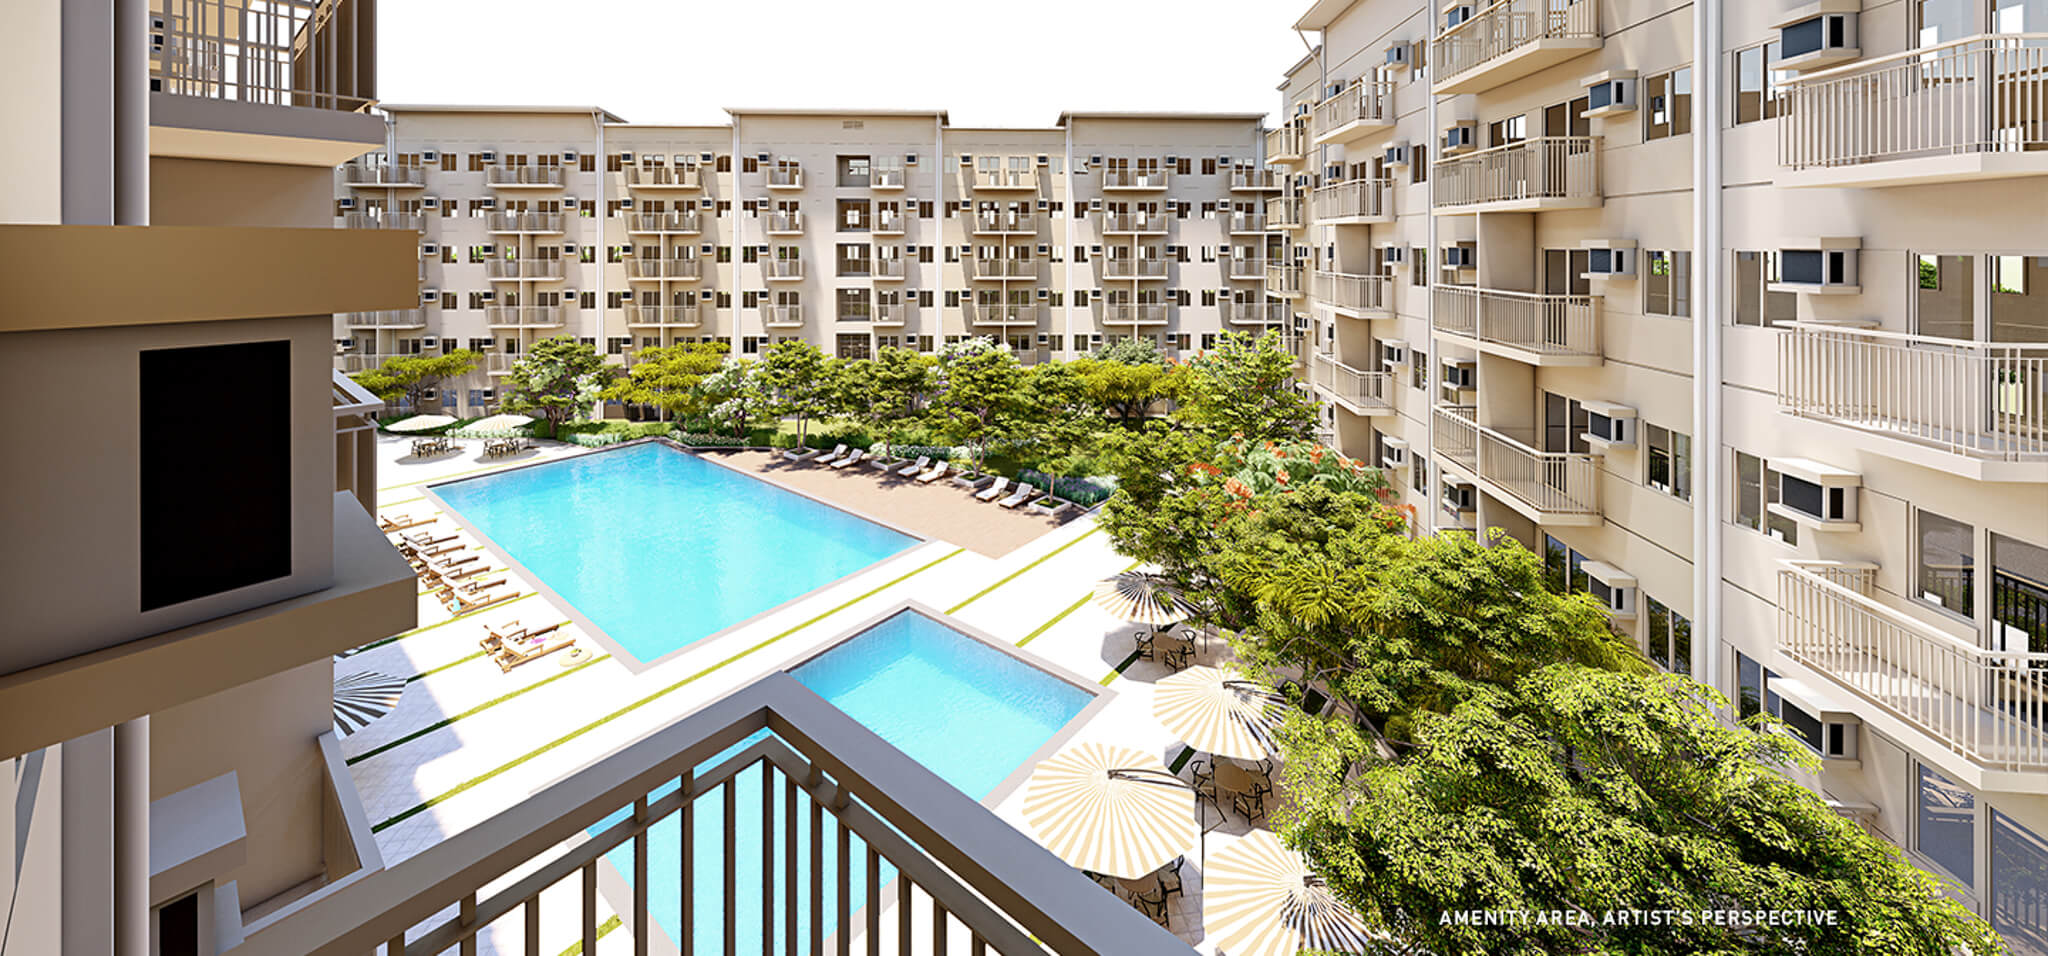 SMDC Hill Residences resort styled swimming pools